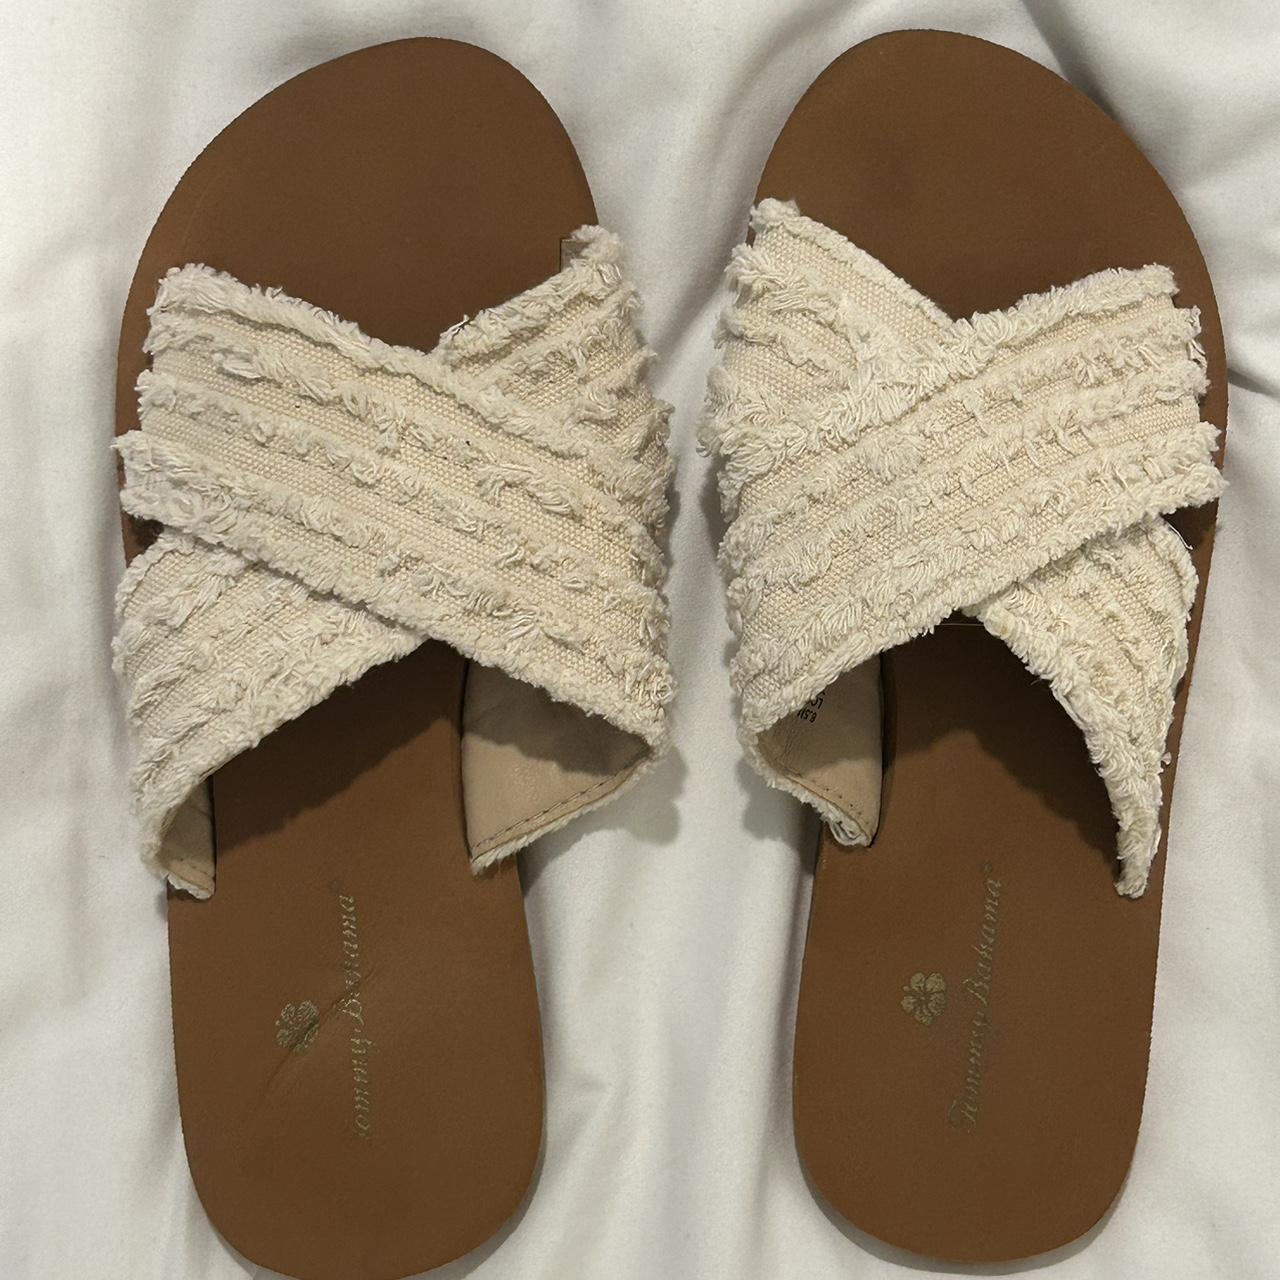 Tommy Bahama Women's Tan and Brown Sandals